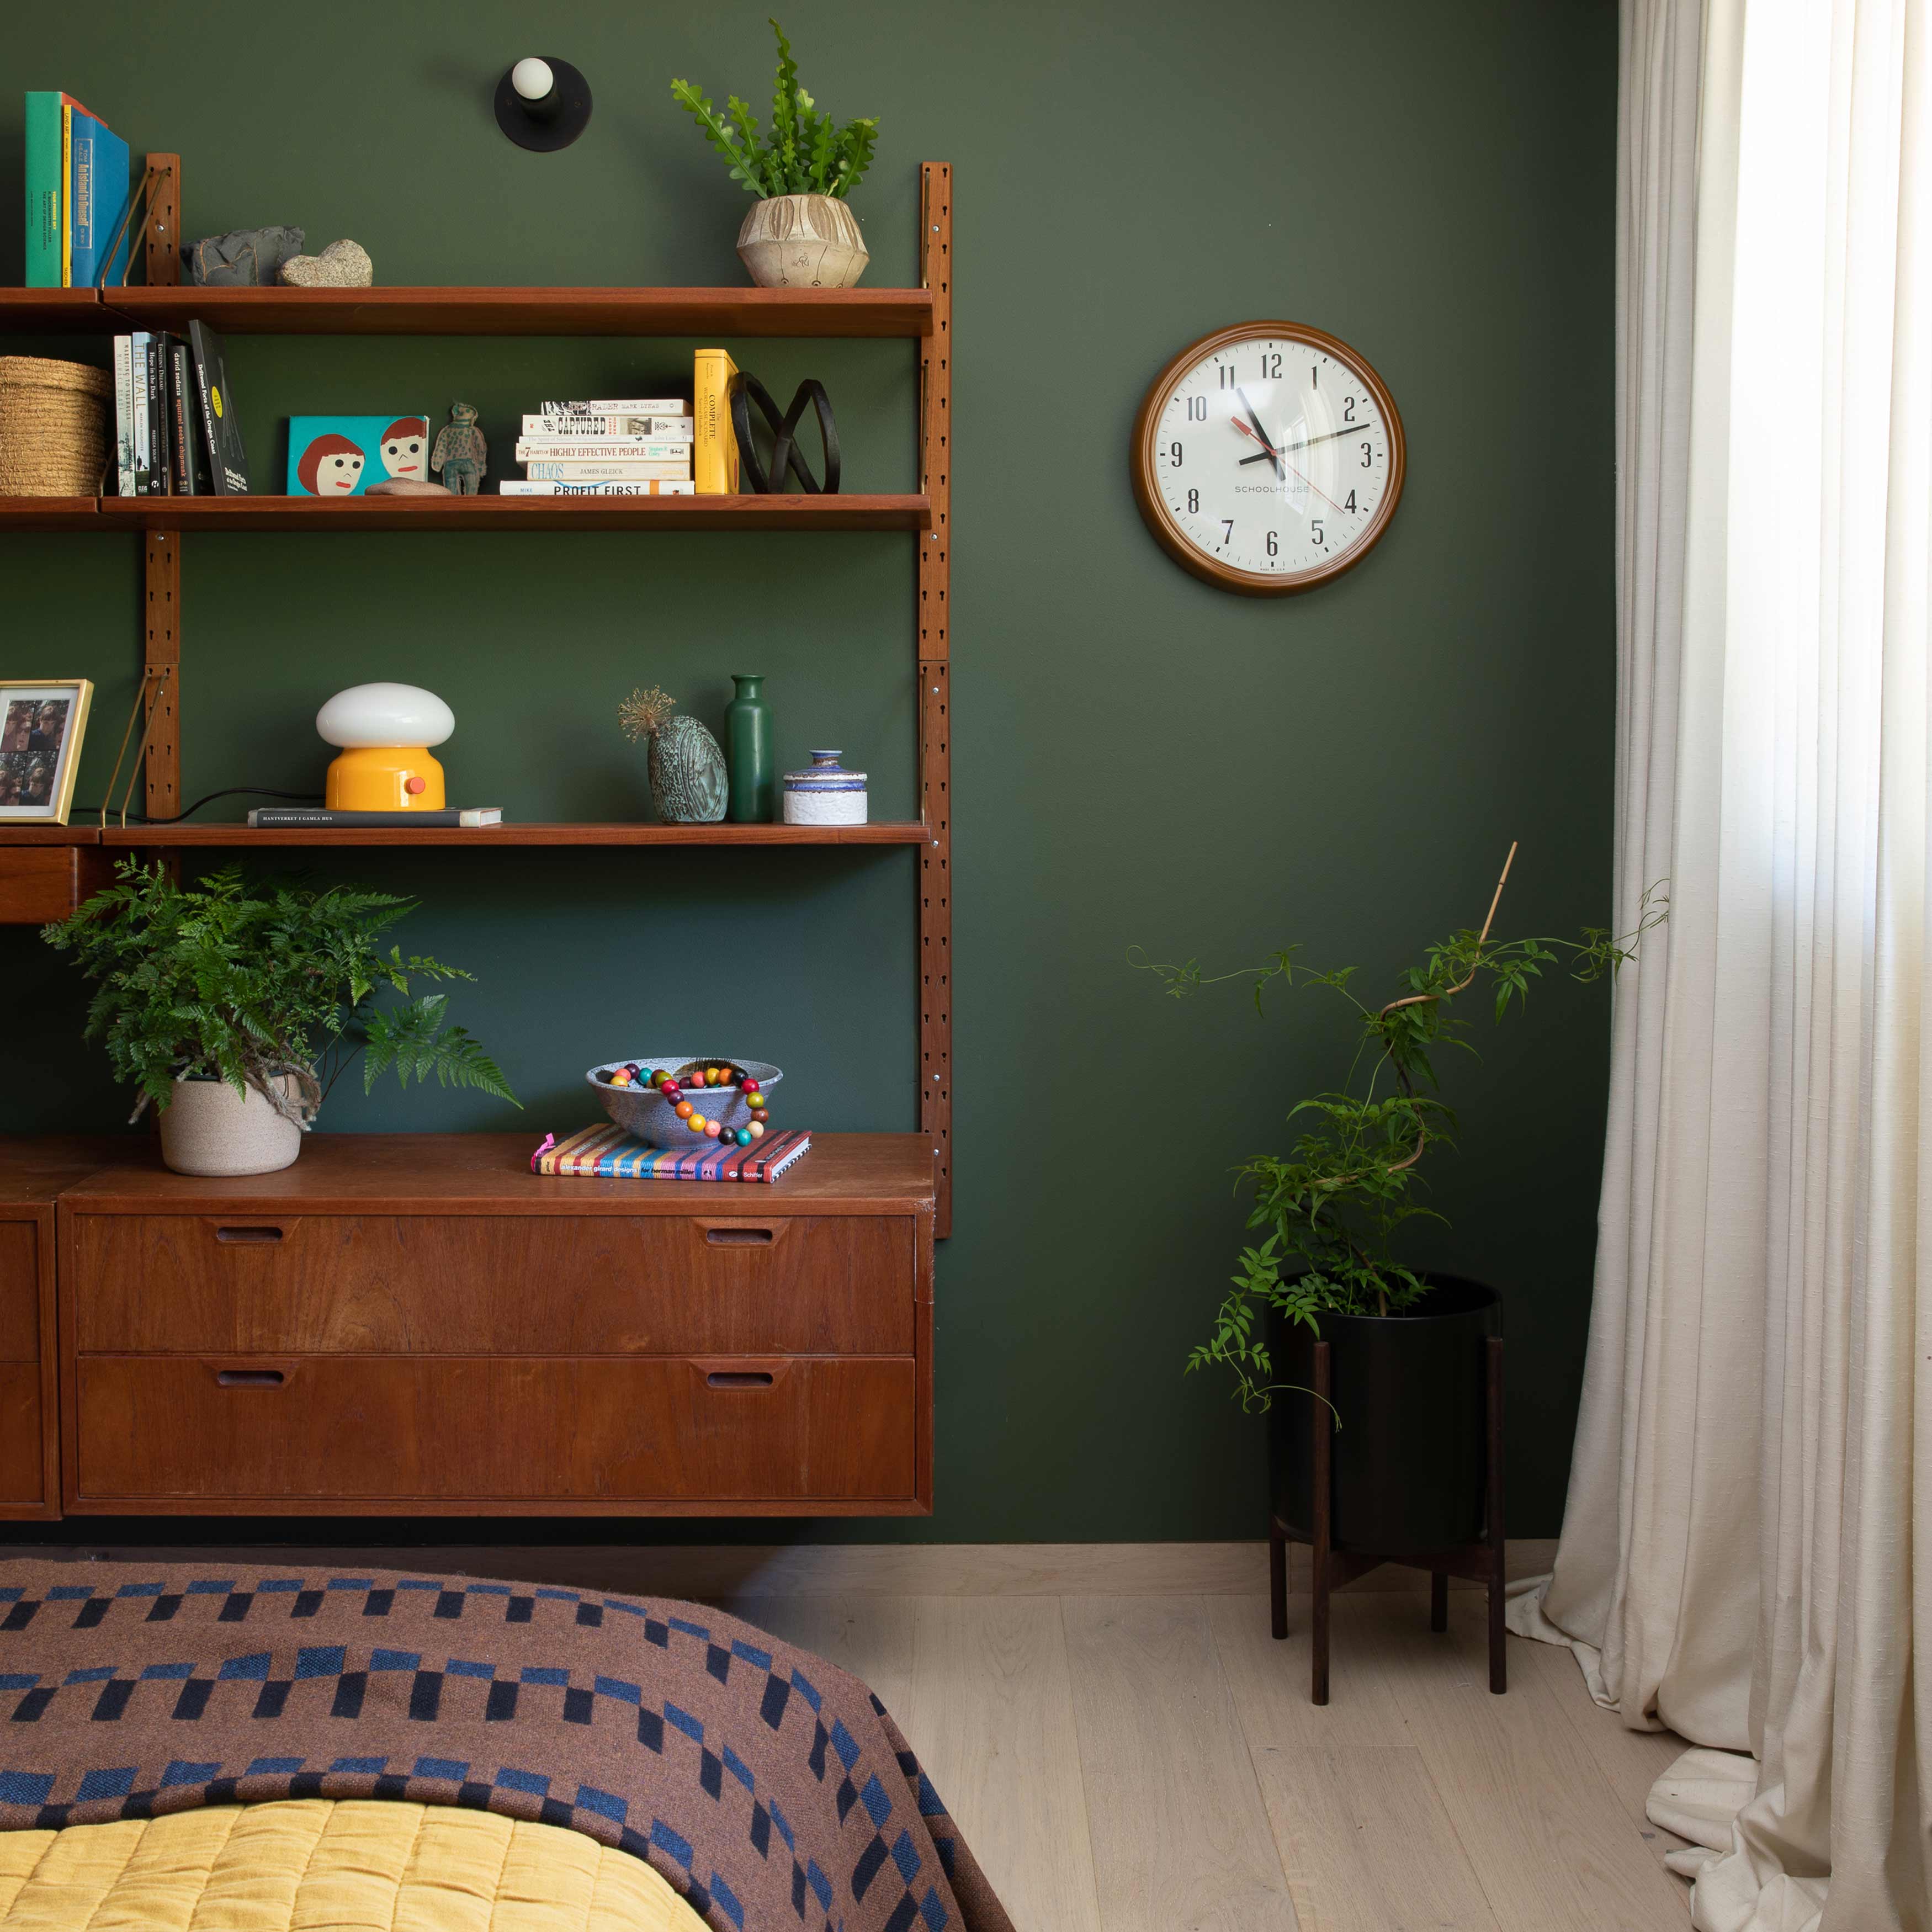 Moody green bedroom with open shelving unit holding a lamp, books, and a few potted plants.